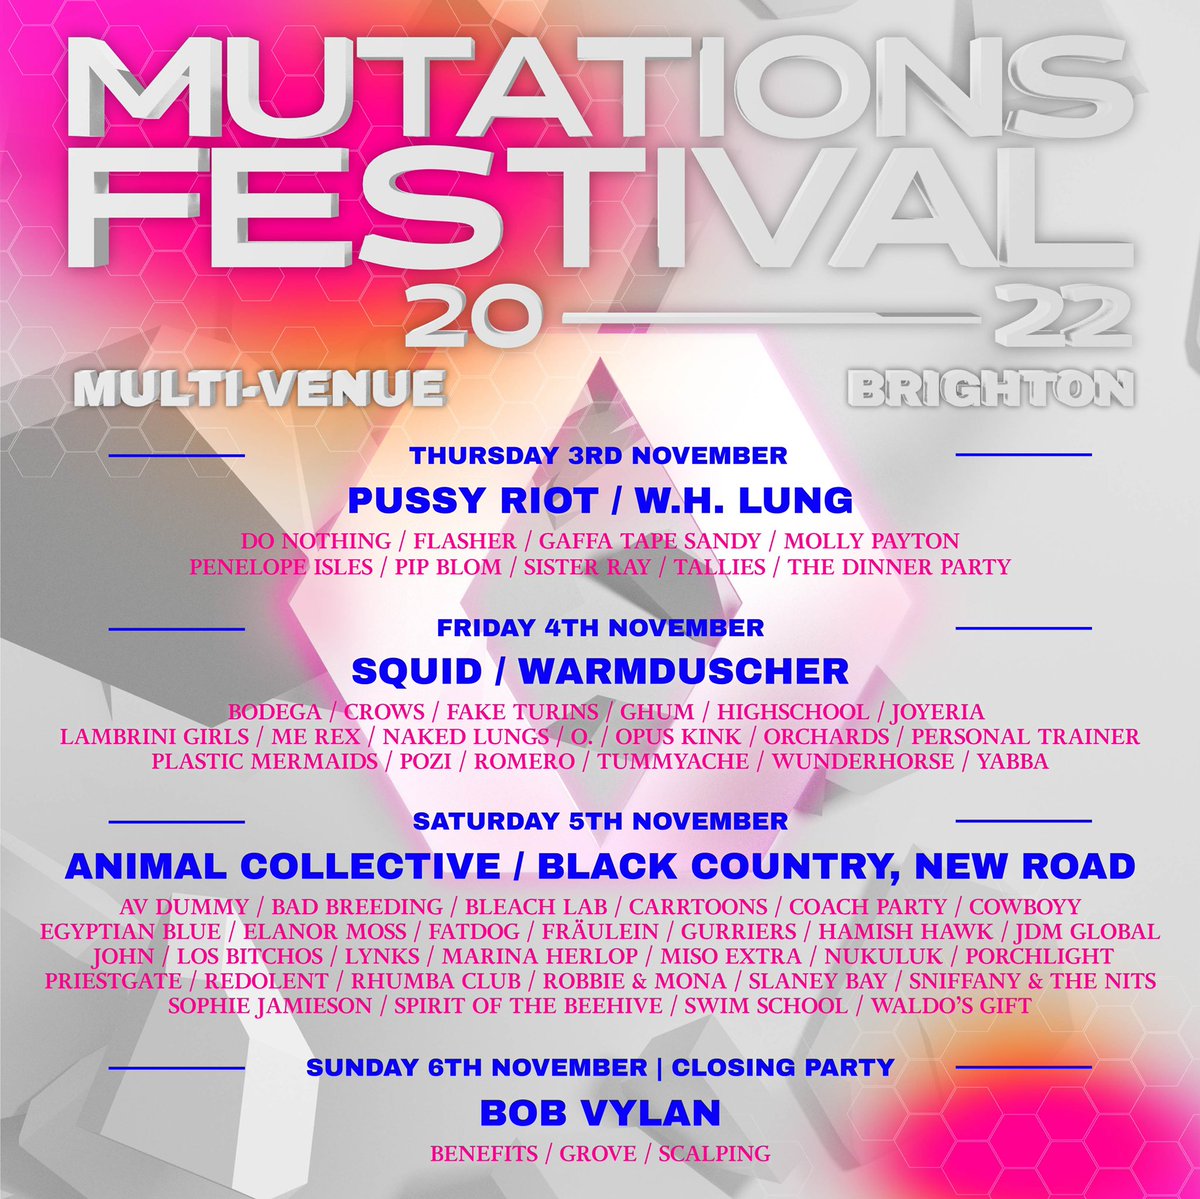 We’re excited to announce that we’re one of the venues taking part in Brighton’s incredible @mutationsfest 2022 this November. Tickets on-sale Friday 10am at mutationsfestival.com